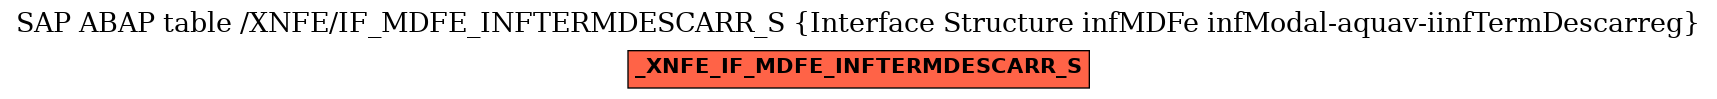 E-R Diagram for table /XNFE/IF_MDFE_INFTERMDESCARR_S (Interface Structure infMDFe infModal-aquav-iinfTermDescarreg)